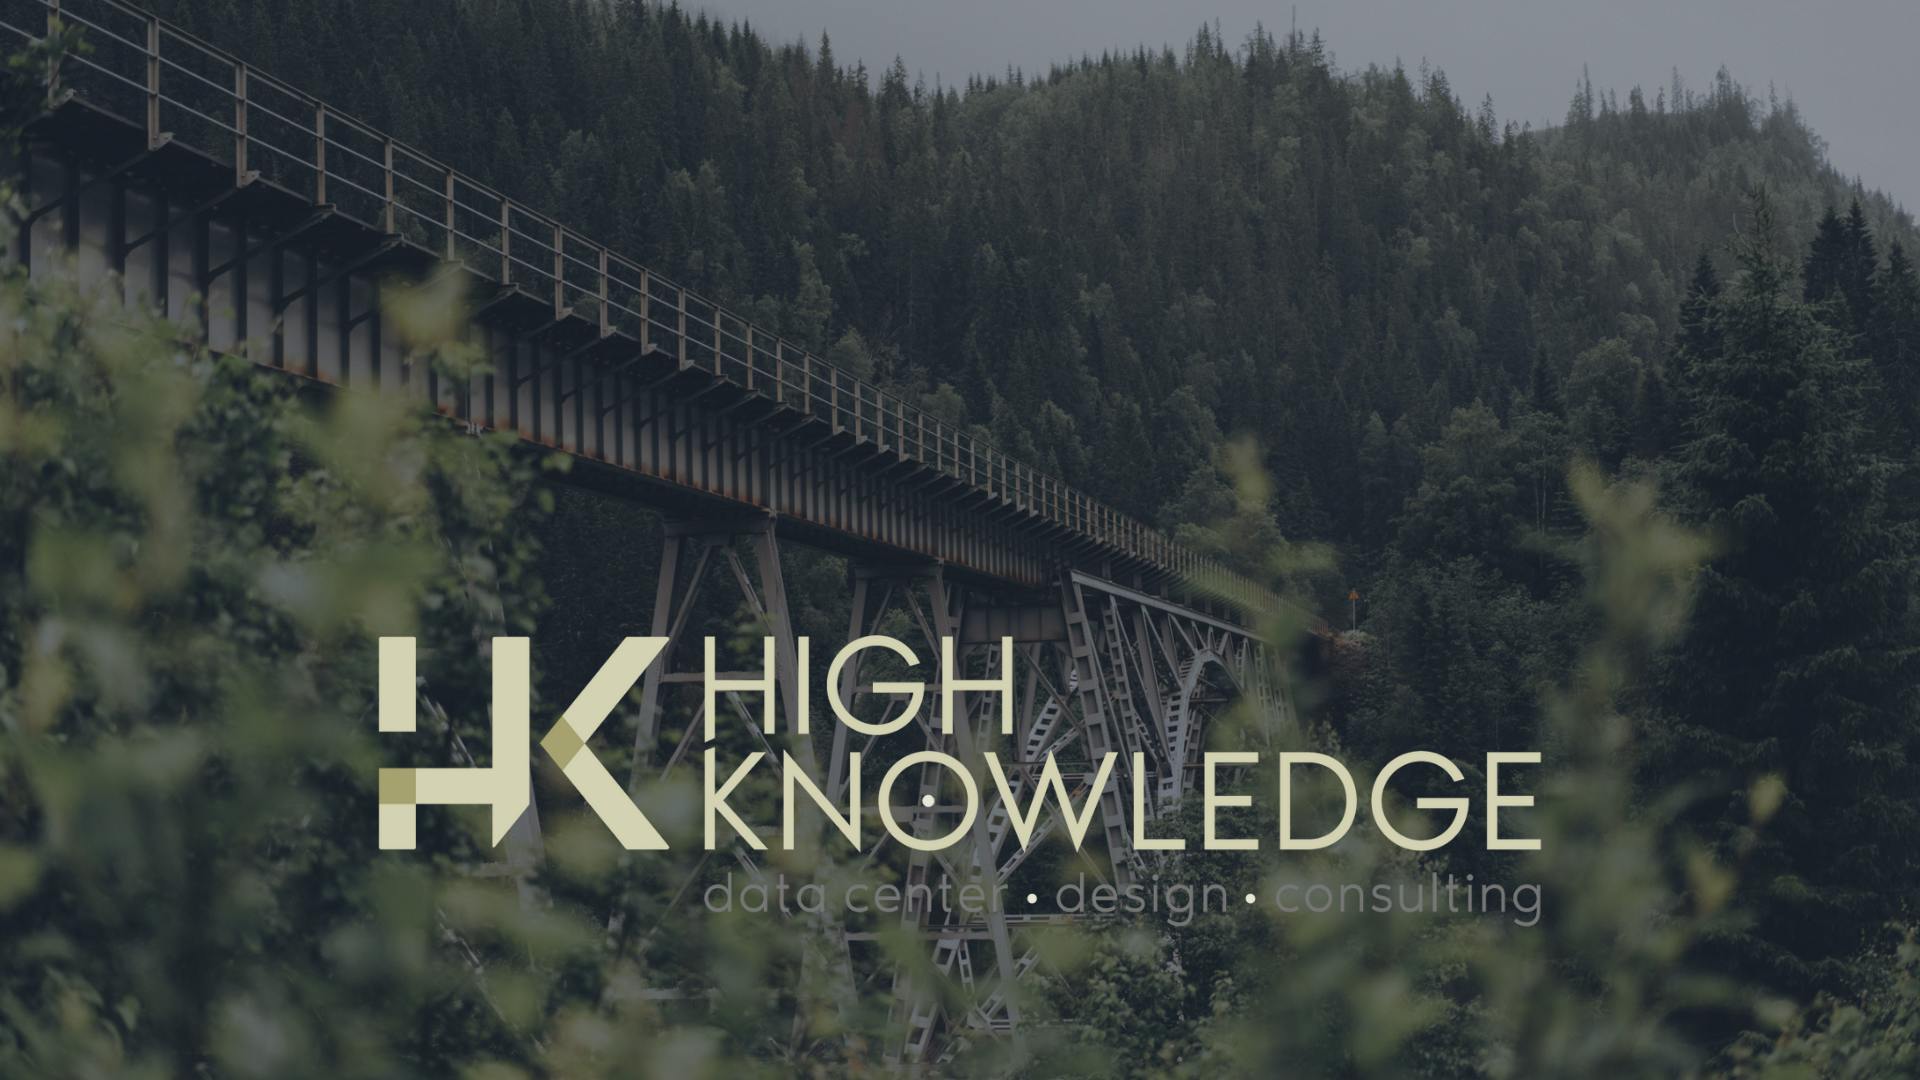 Press Release: High Knowledge Becomes Latest Member of the SDIA